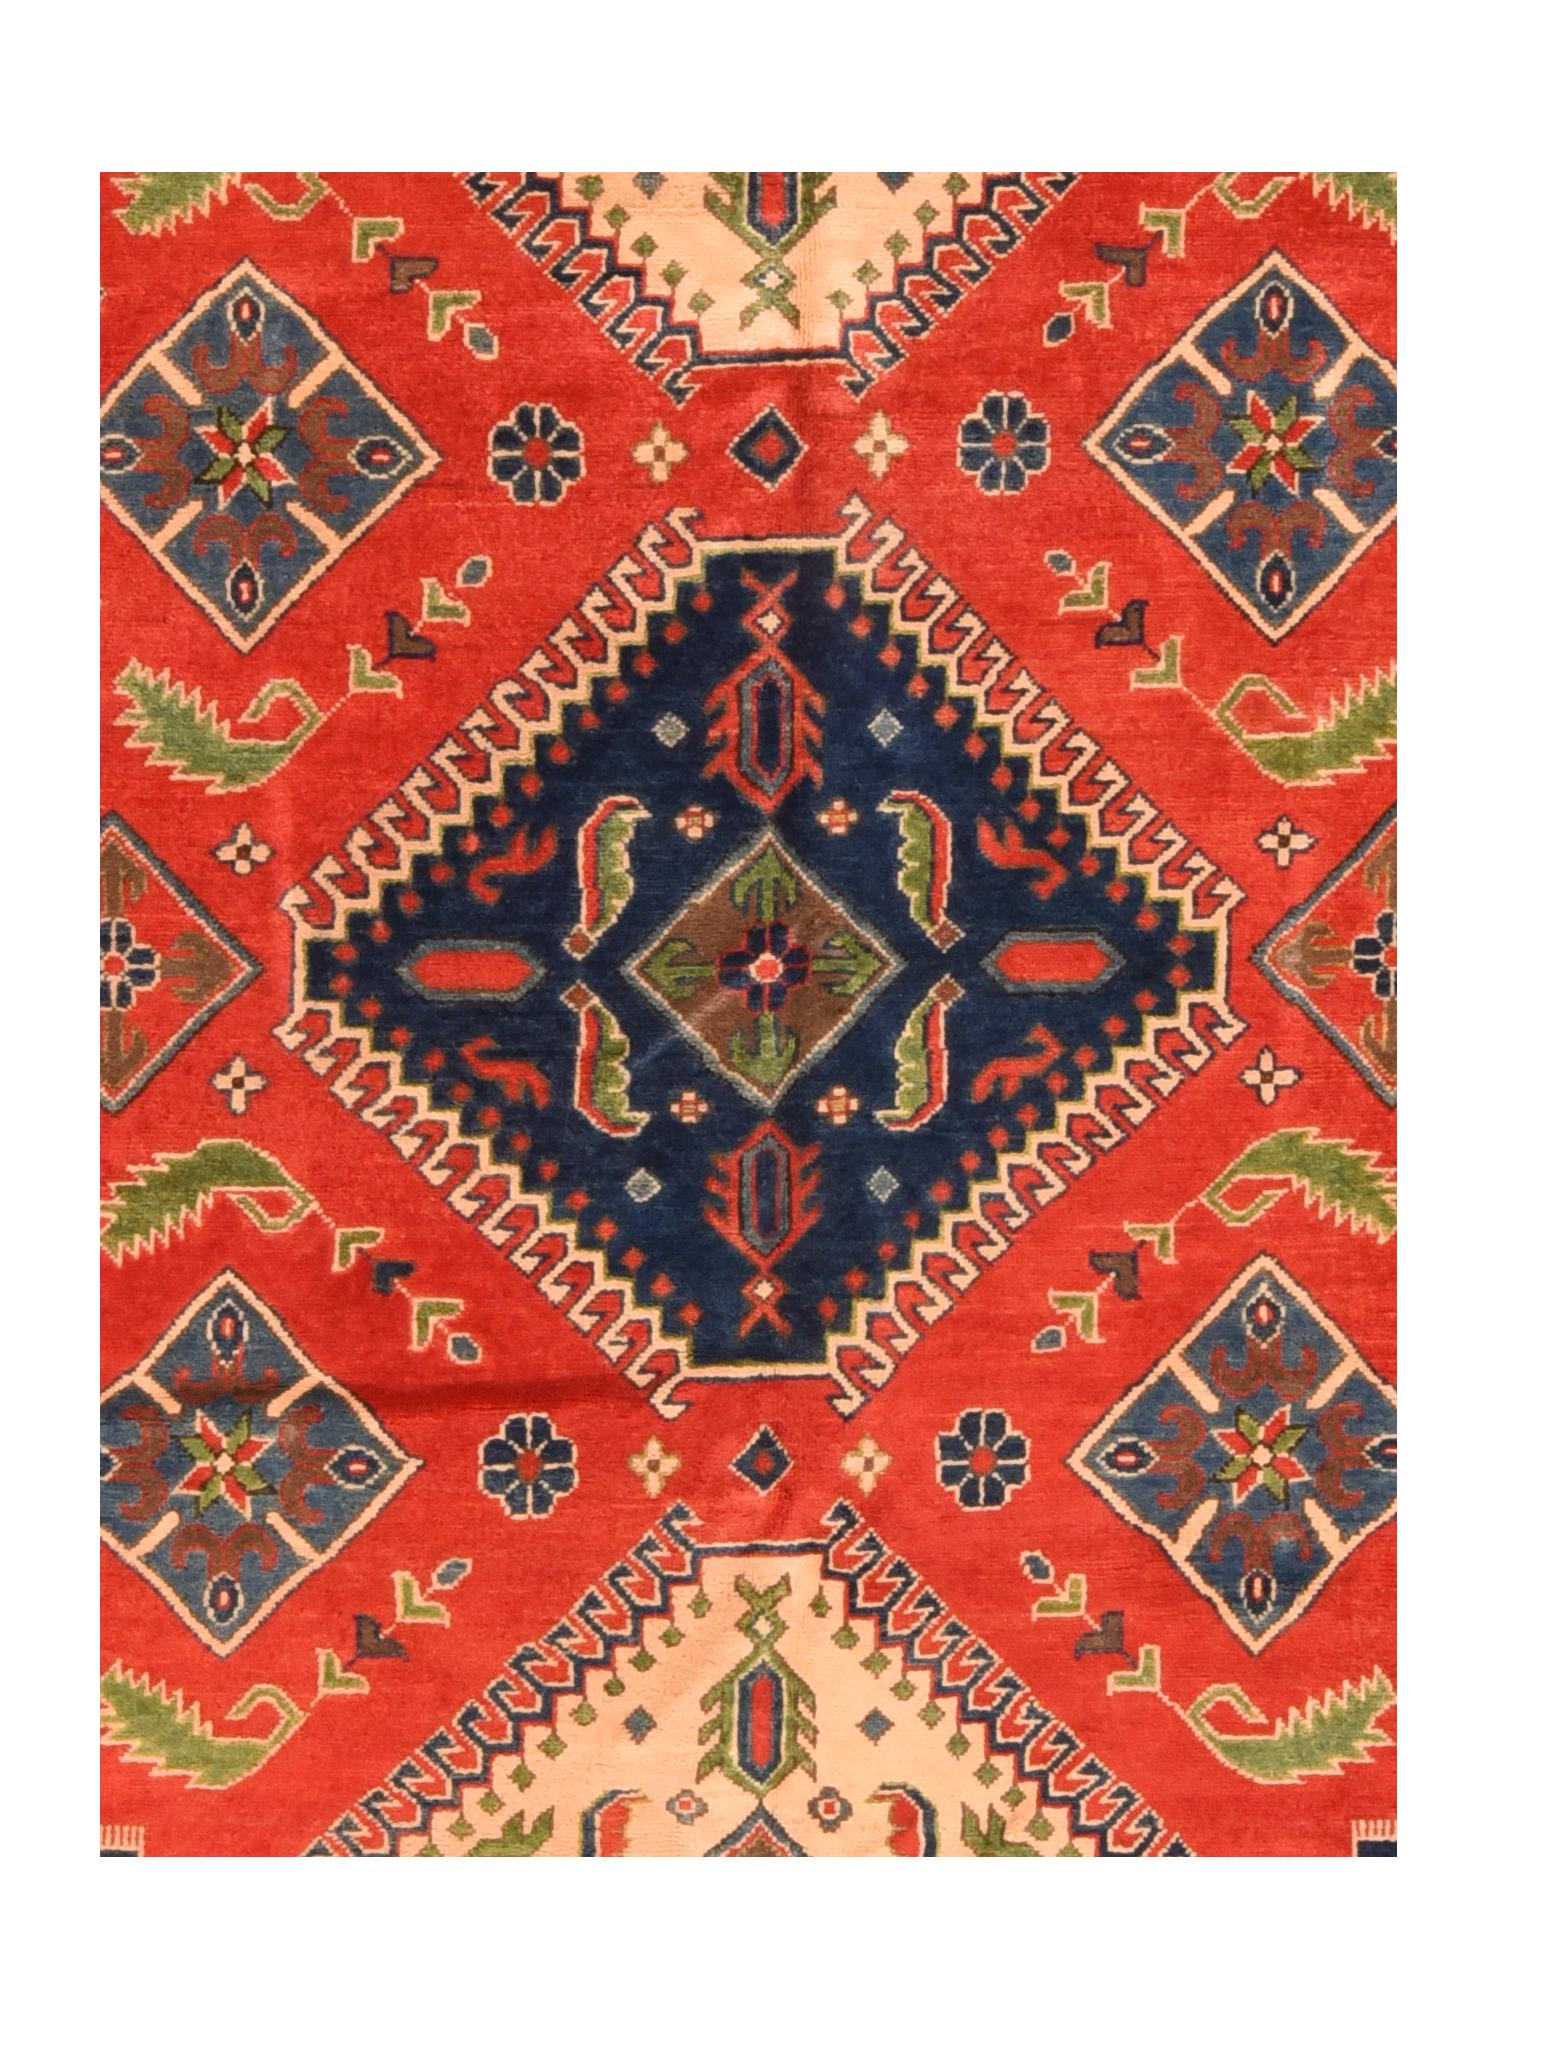 Fine Pak red Kazak Pakistani rug, hand knotted

Design: Three Diamond

A Pakistani rug (Pak Persian rug or Pakistani carpet) is a type of handmade floor-covering textile traditionally made in Pakistan

The art of weaving developed in the